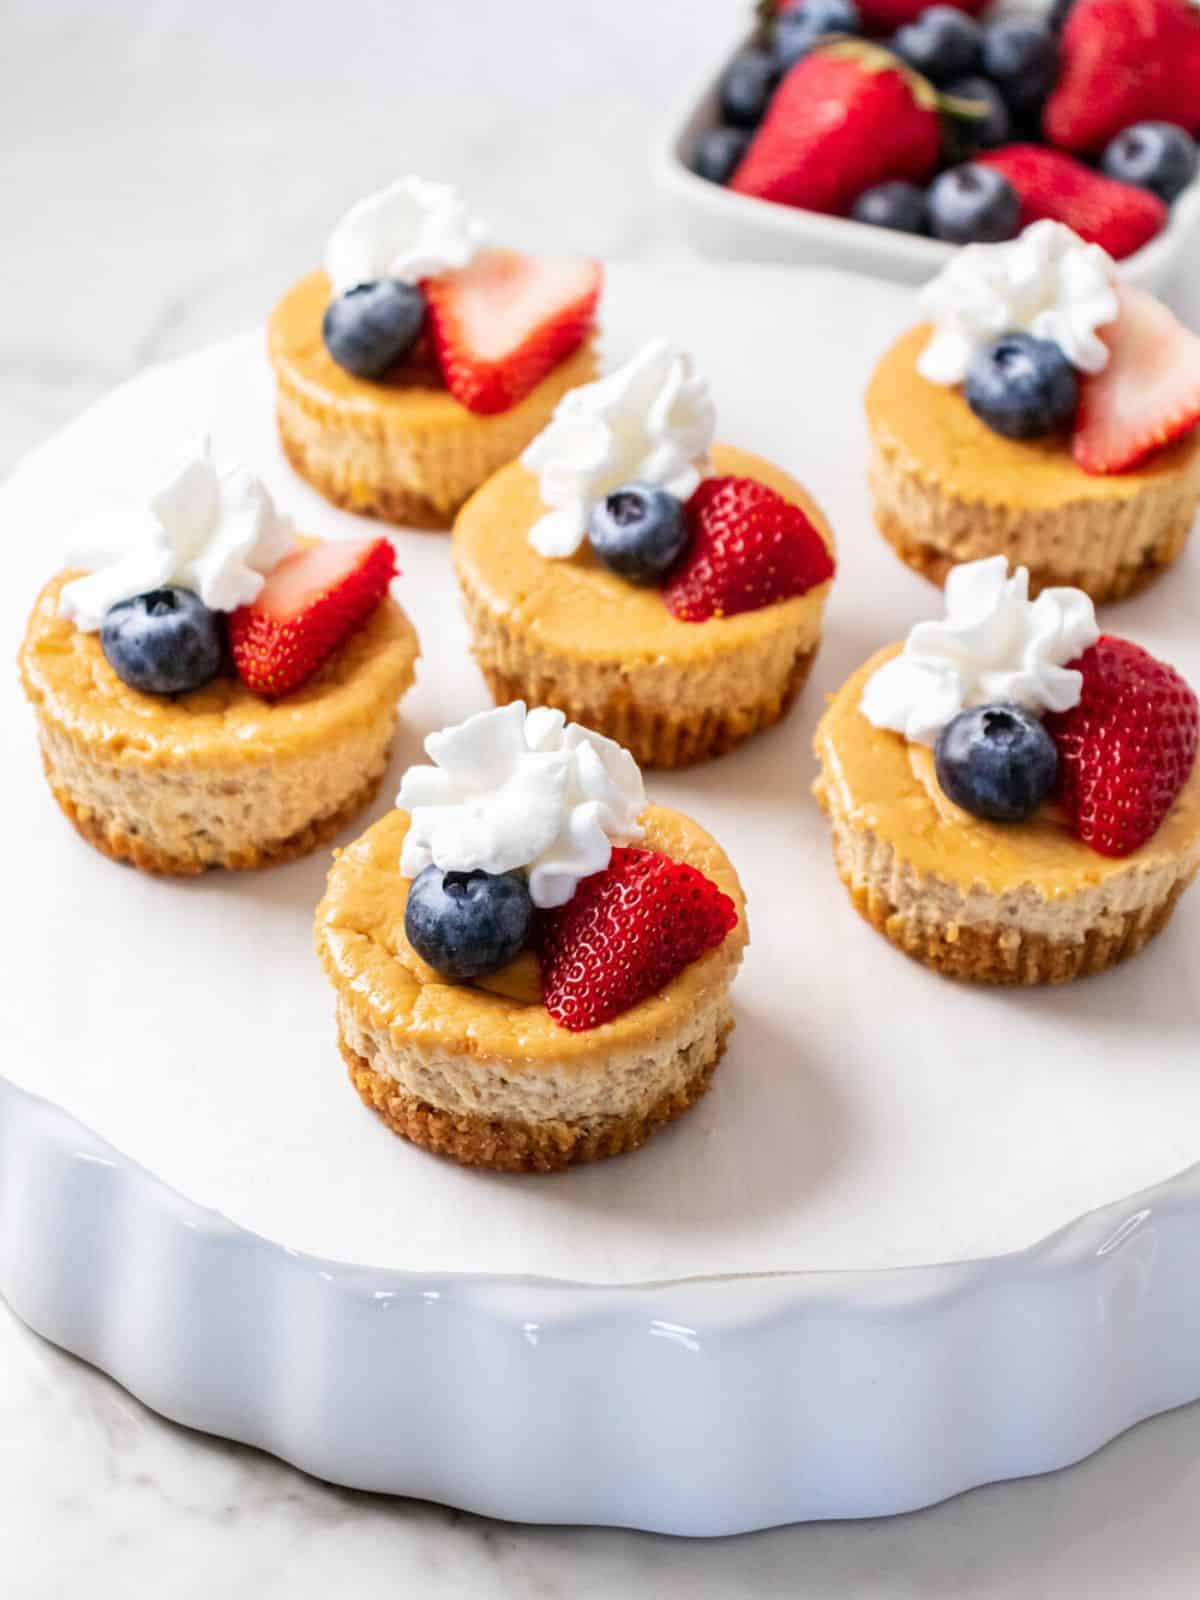 Healthy Mini Protein Cheesecakes are a low fat treat made with Greek Yogurt, lower in sugar and delicious! These healthier cheesecakes will soon become your favorite dessert recipe!